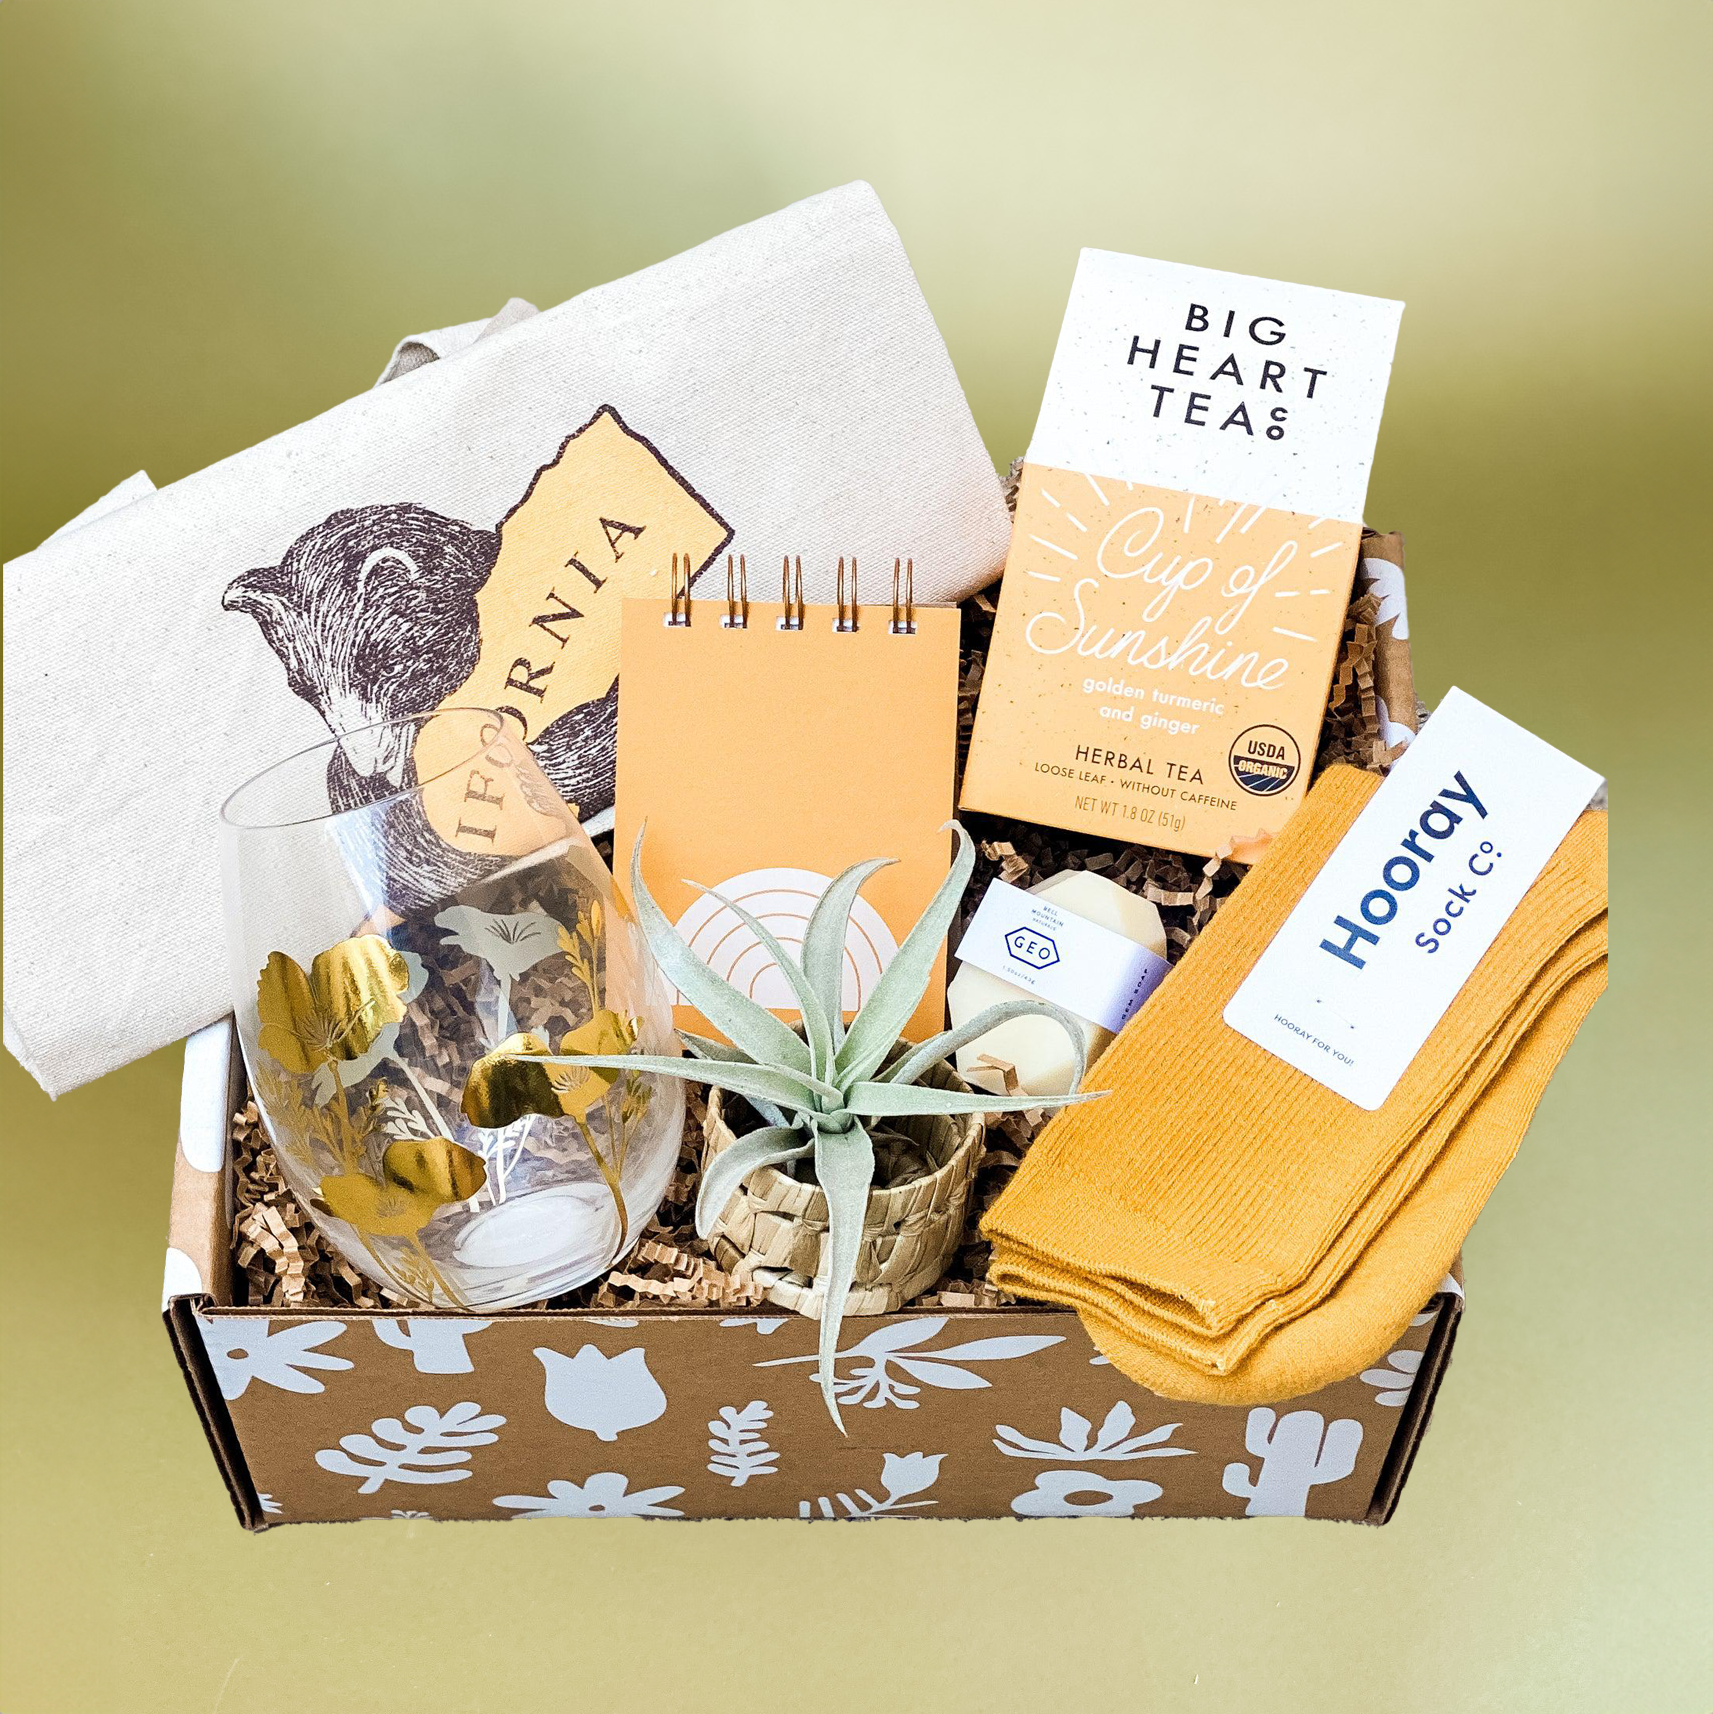 5 Personalized Holiday Photo Gift Ideas from Minted – Merritt Style